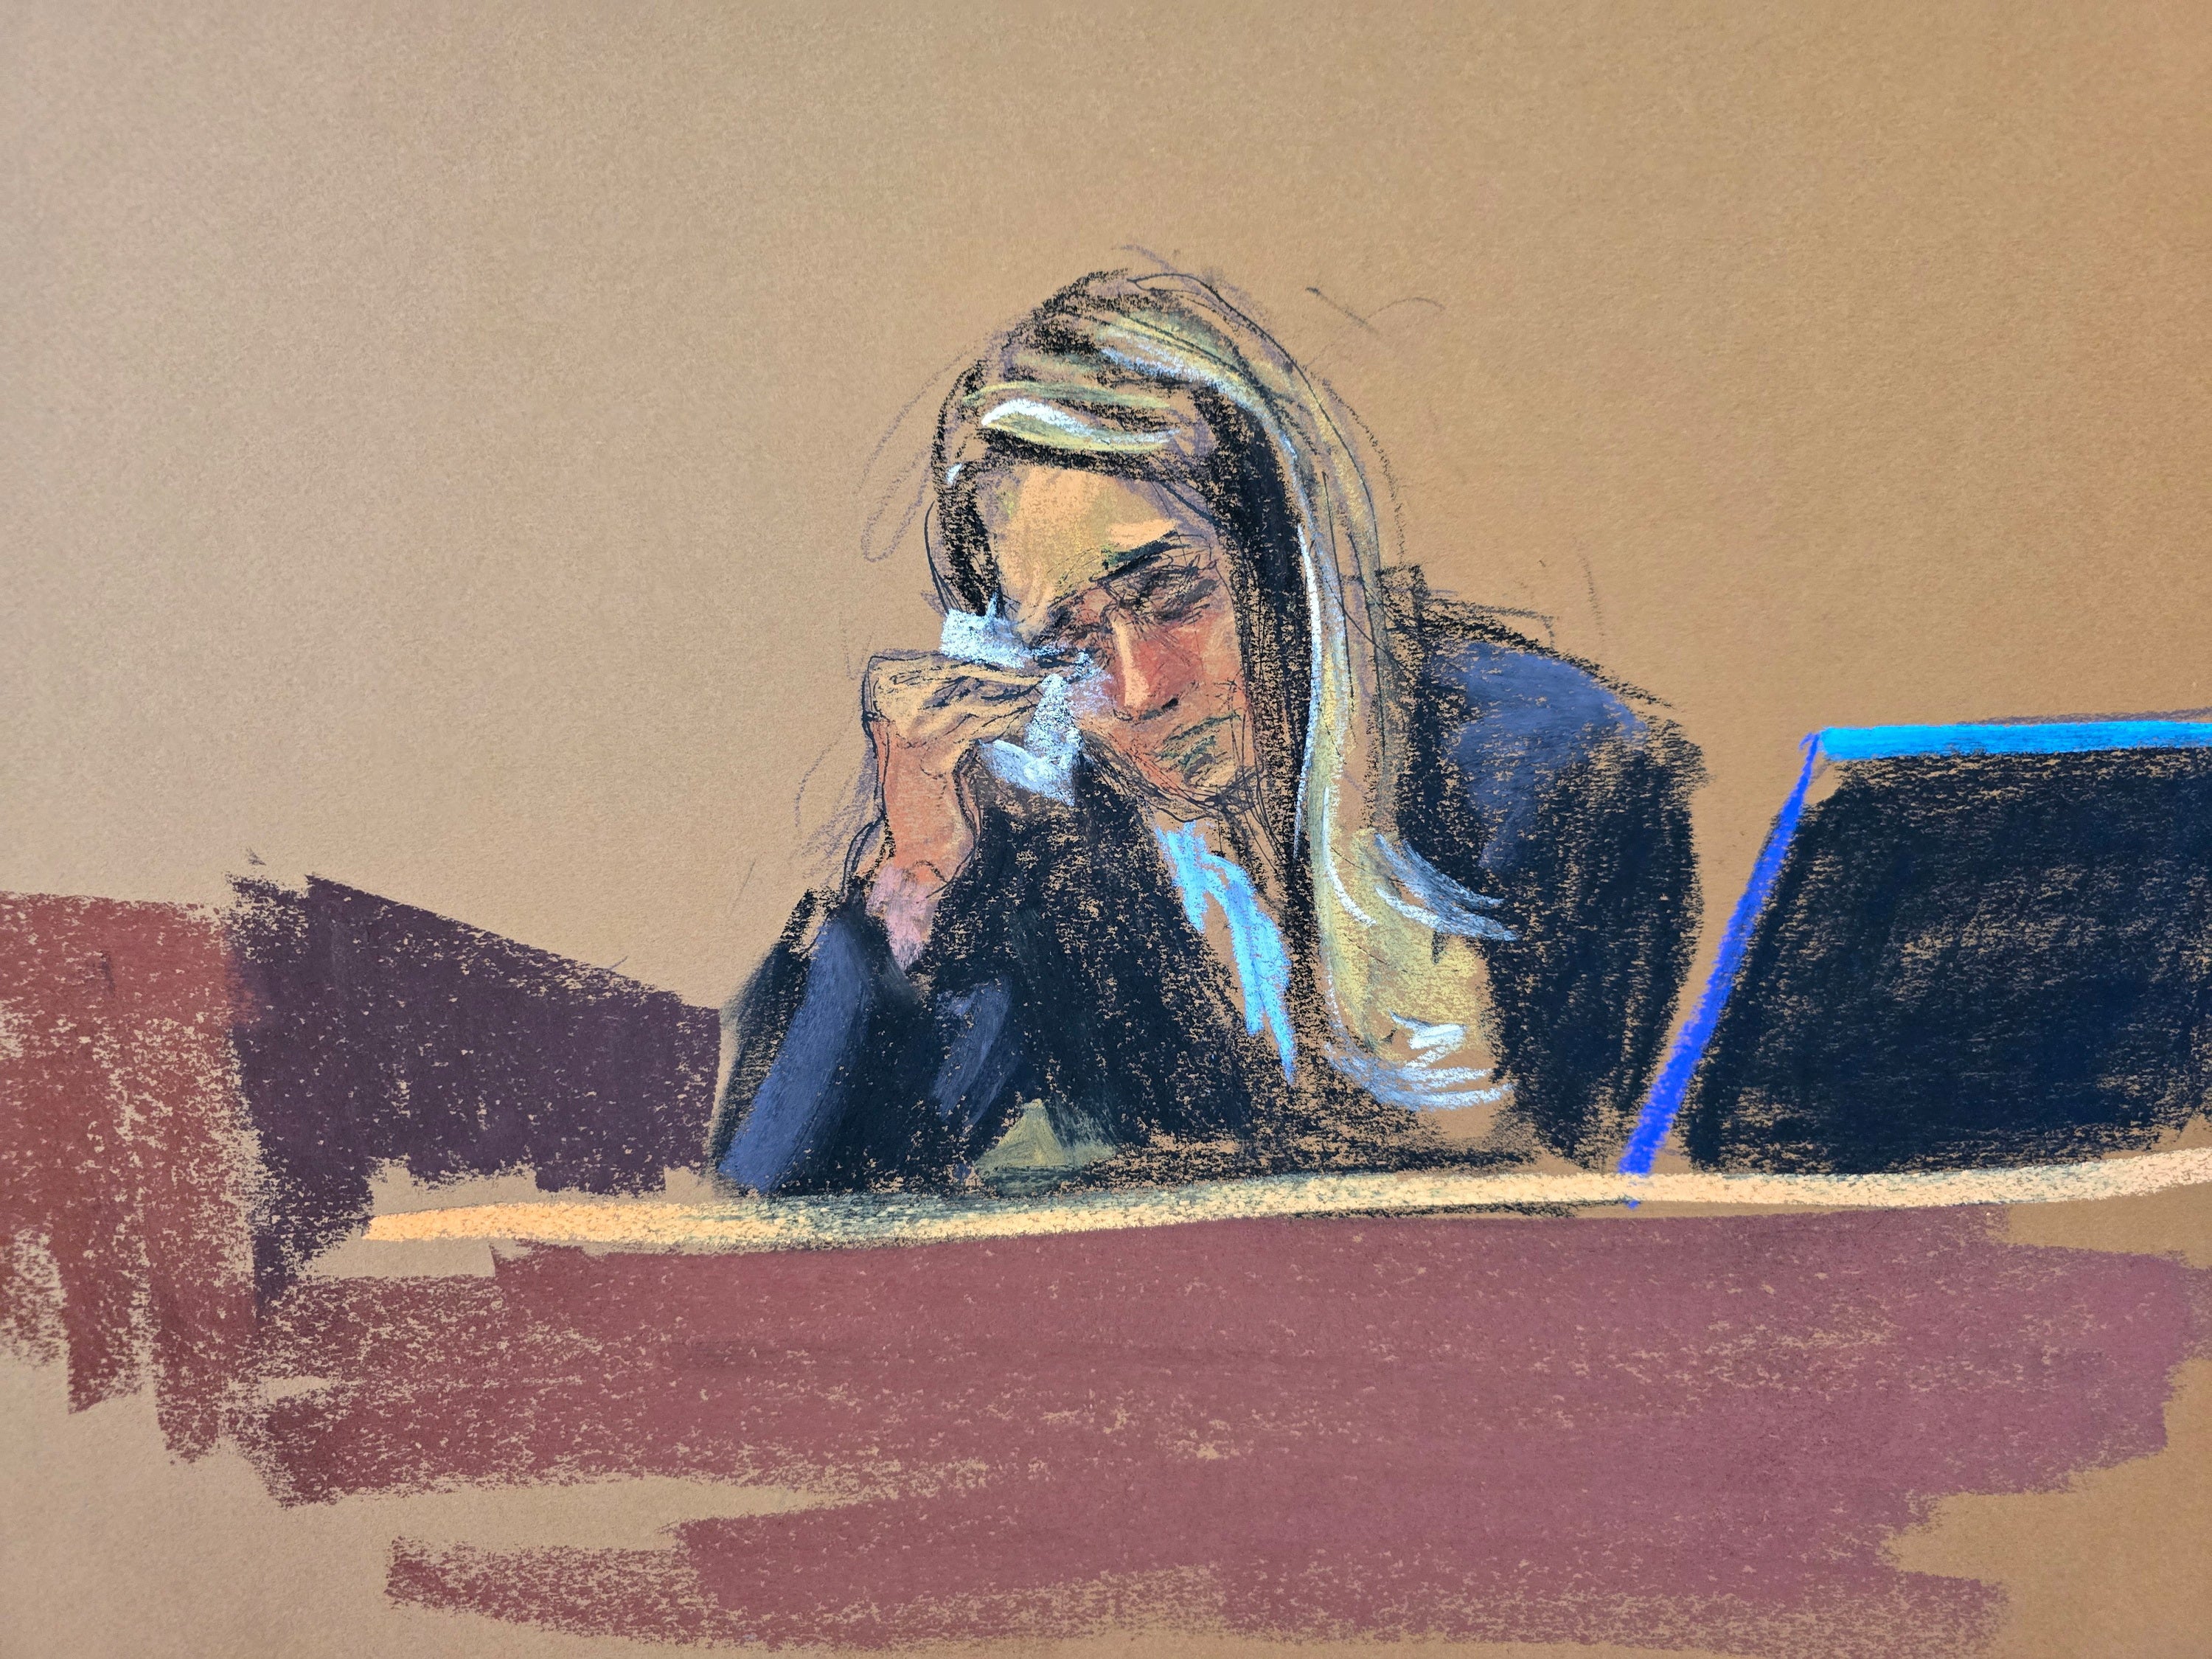 A courtroom sketch captures Hope Hicks isssuing a tissue to dab her eyes during Donald Trump’s criminal trial in Manhattan on 3 May.